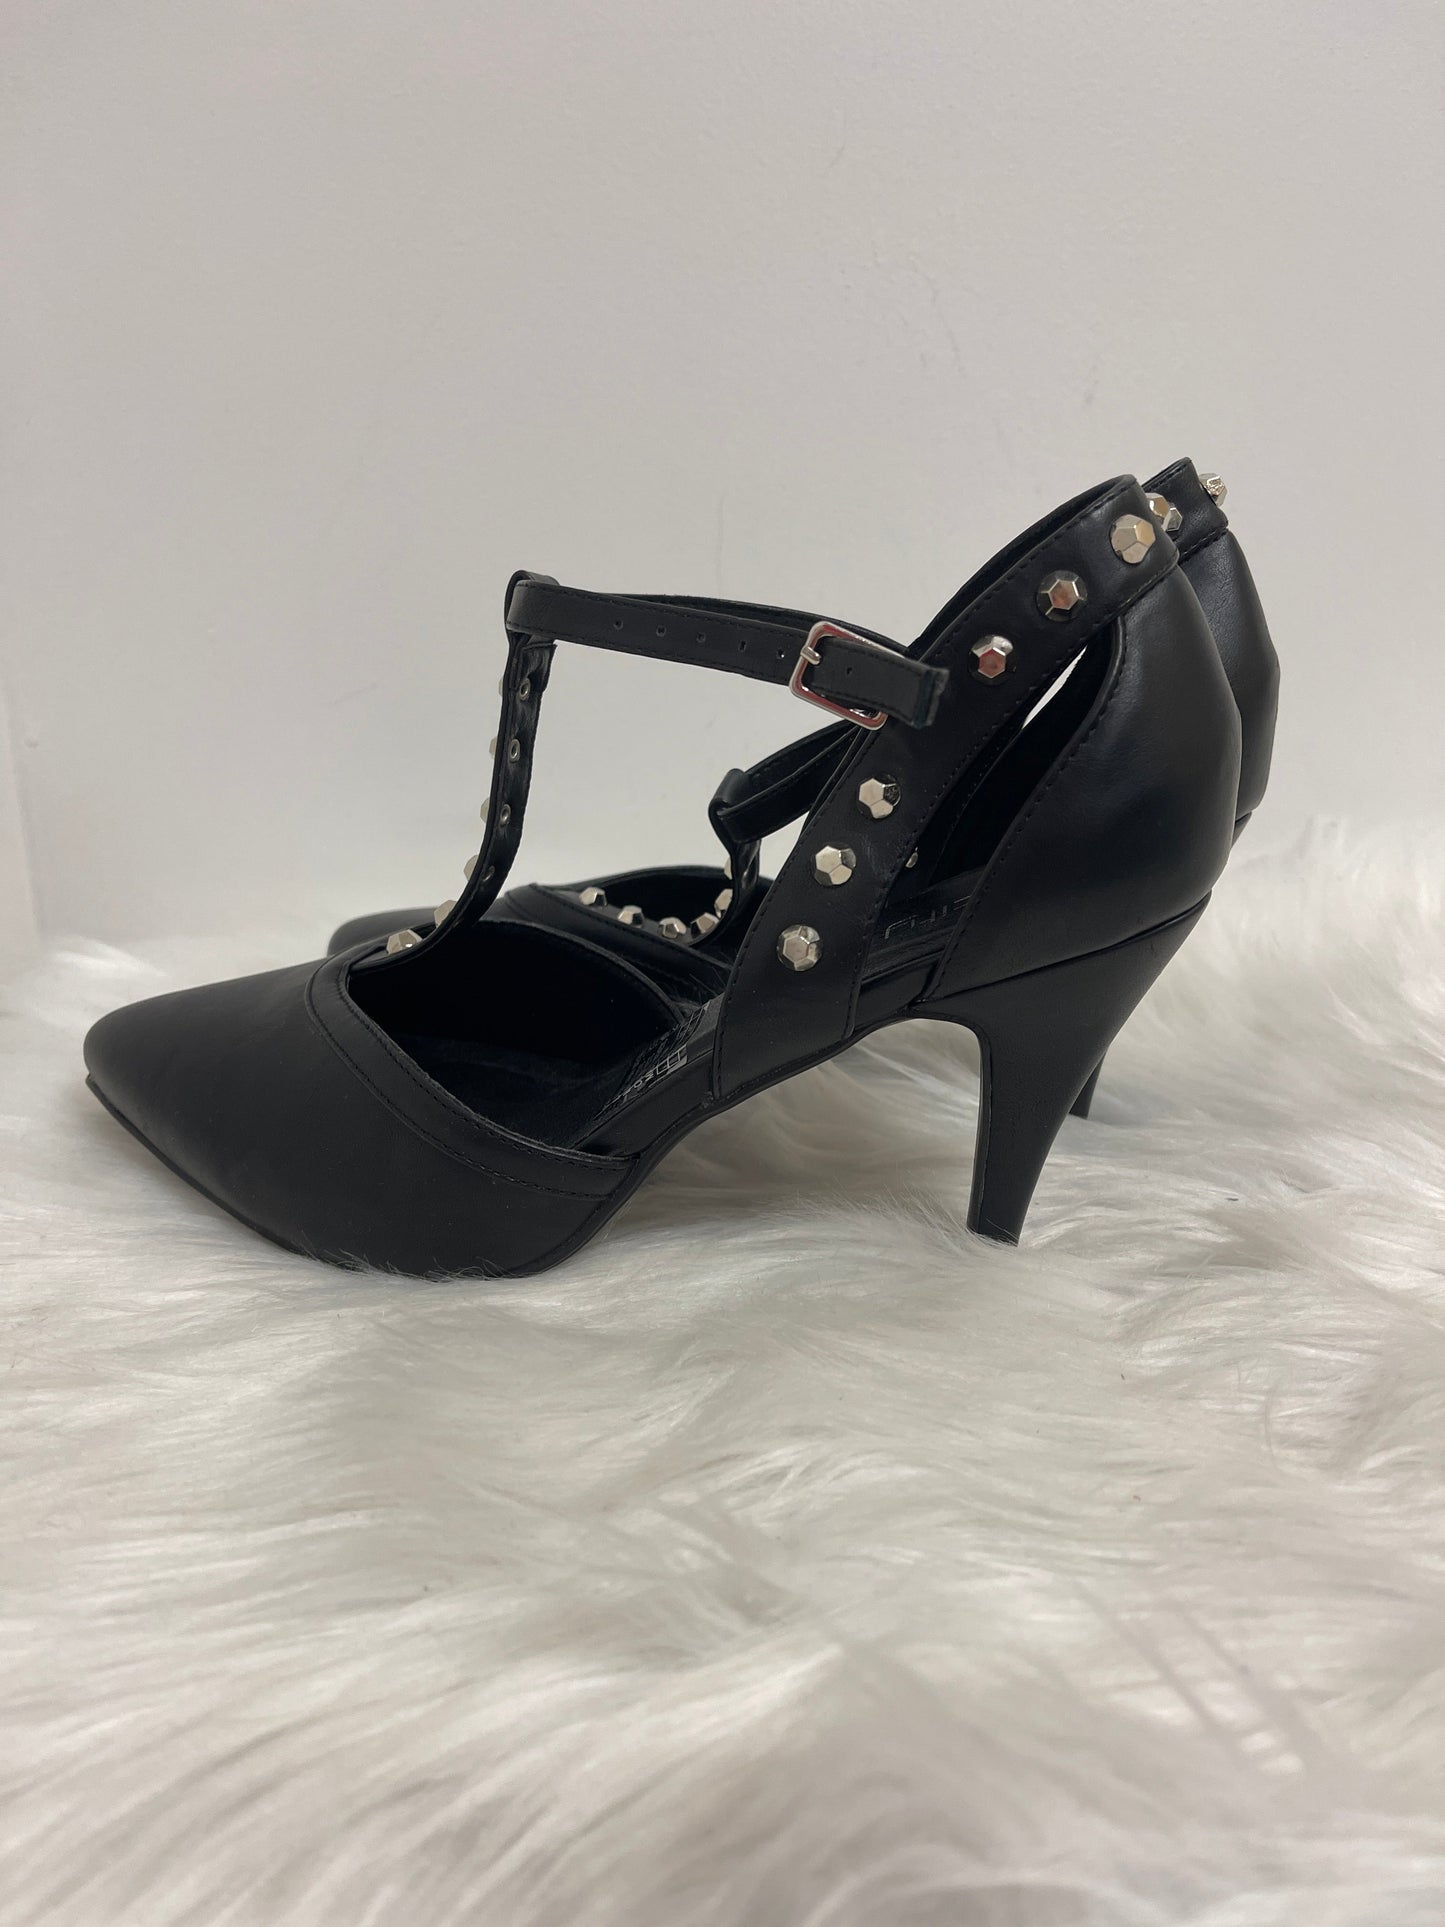 Shoes Heels Stiletto By City Chic  Size: 10